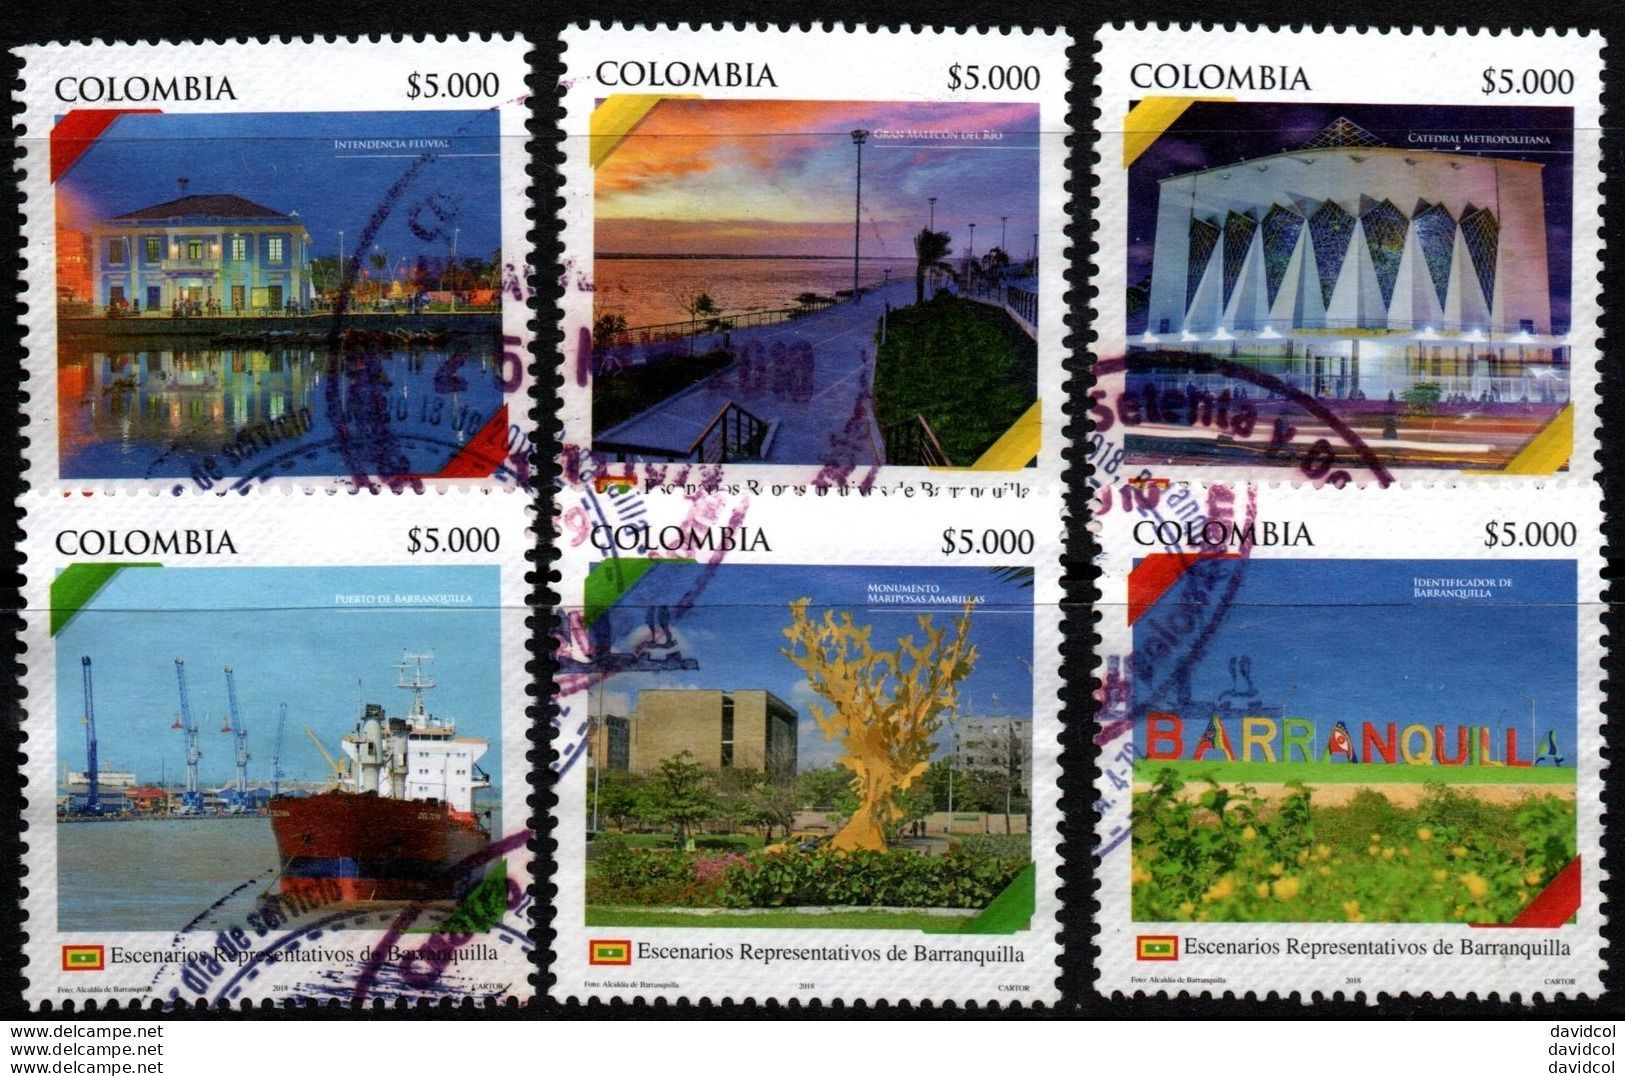 0036D - KOLUMBIEN 2018. BARRANQUILLA VIEWS. COMPLETE USED SET X 6 STAMPS. - Colombia